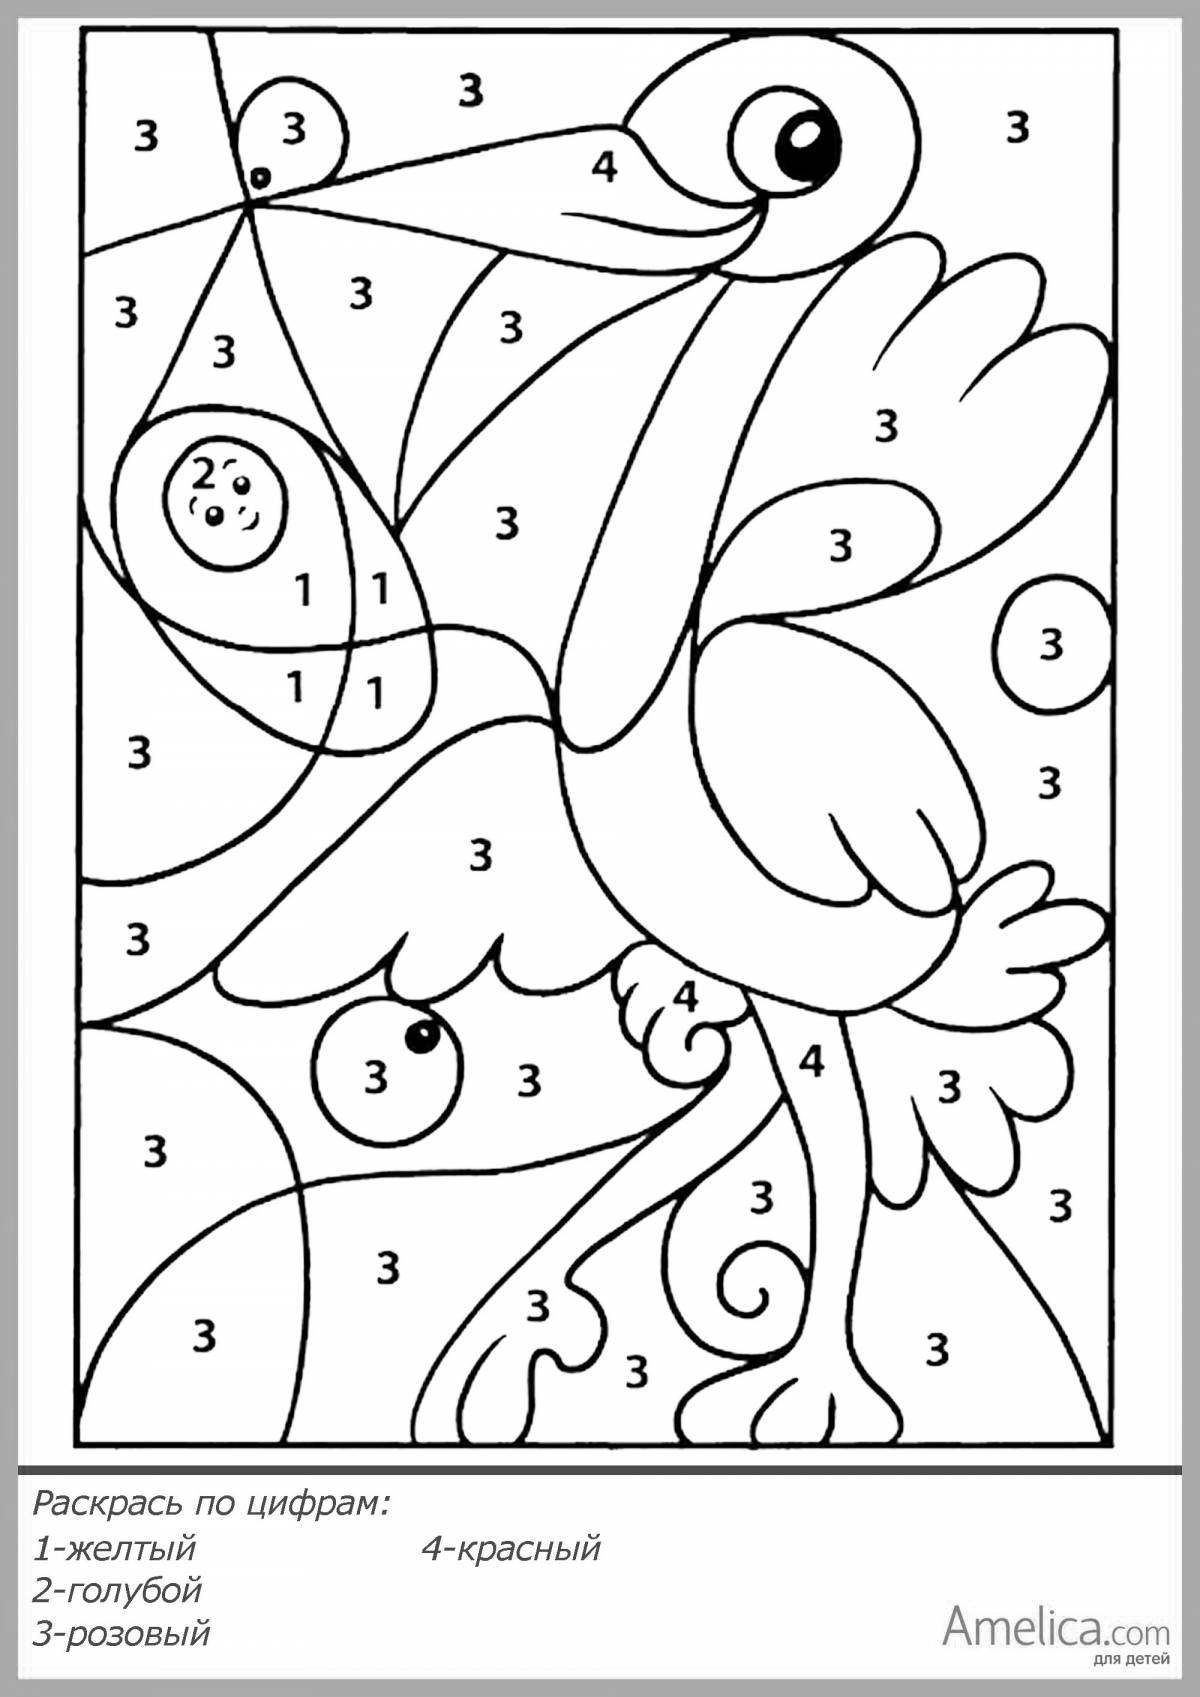 Coloring book Grade 2 by numbers